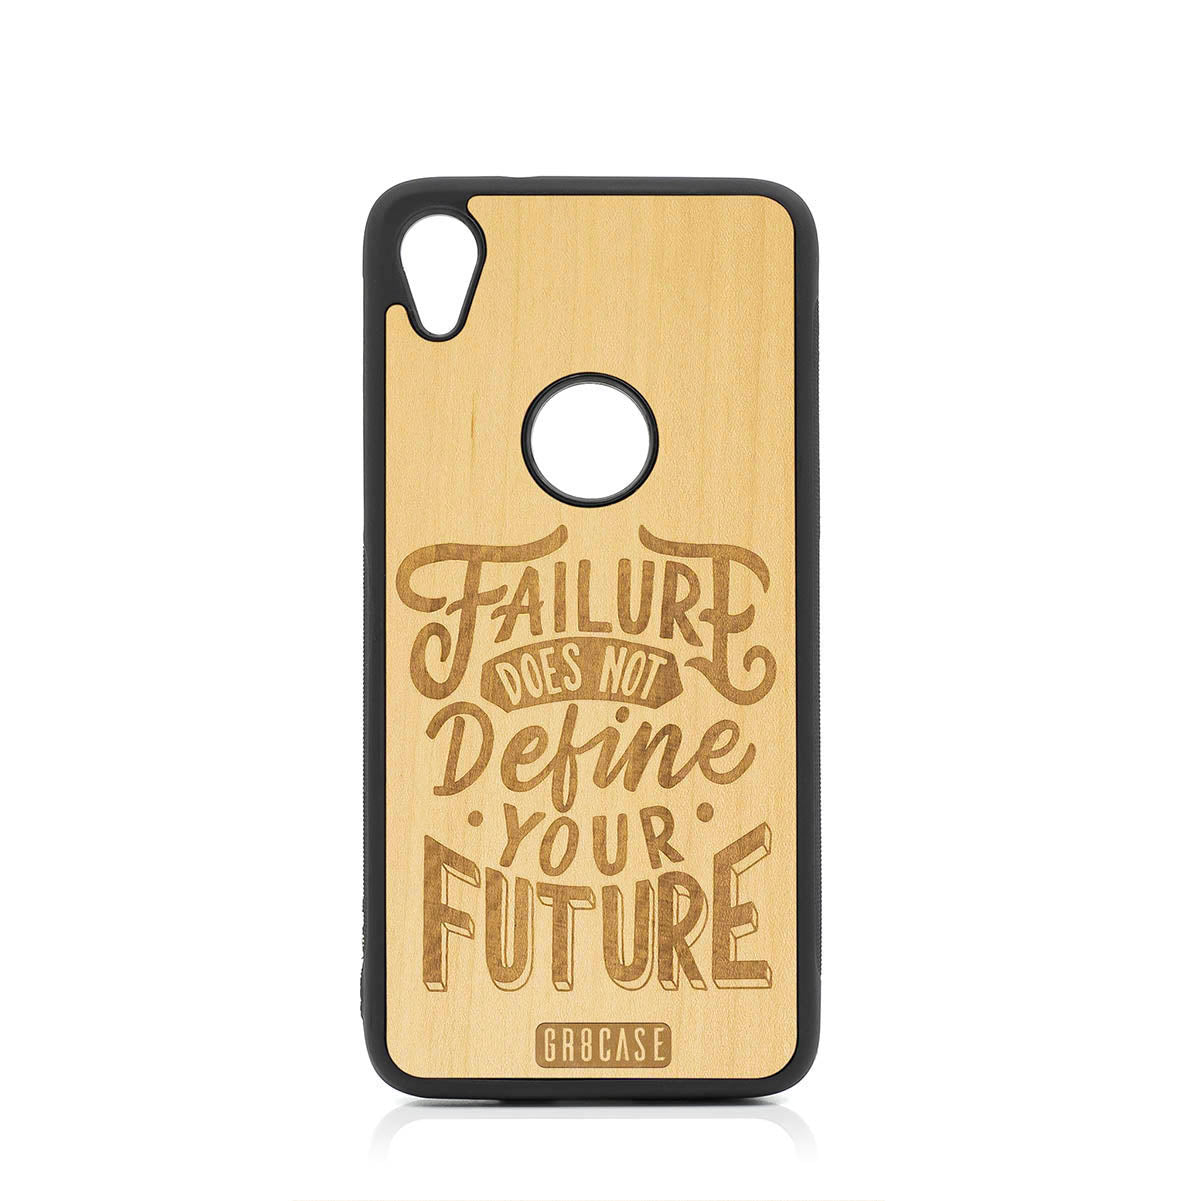 Failure Does Not Define You Future Design Wood Case For Moto E6 by GR8CASE